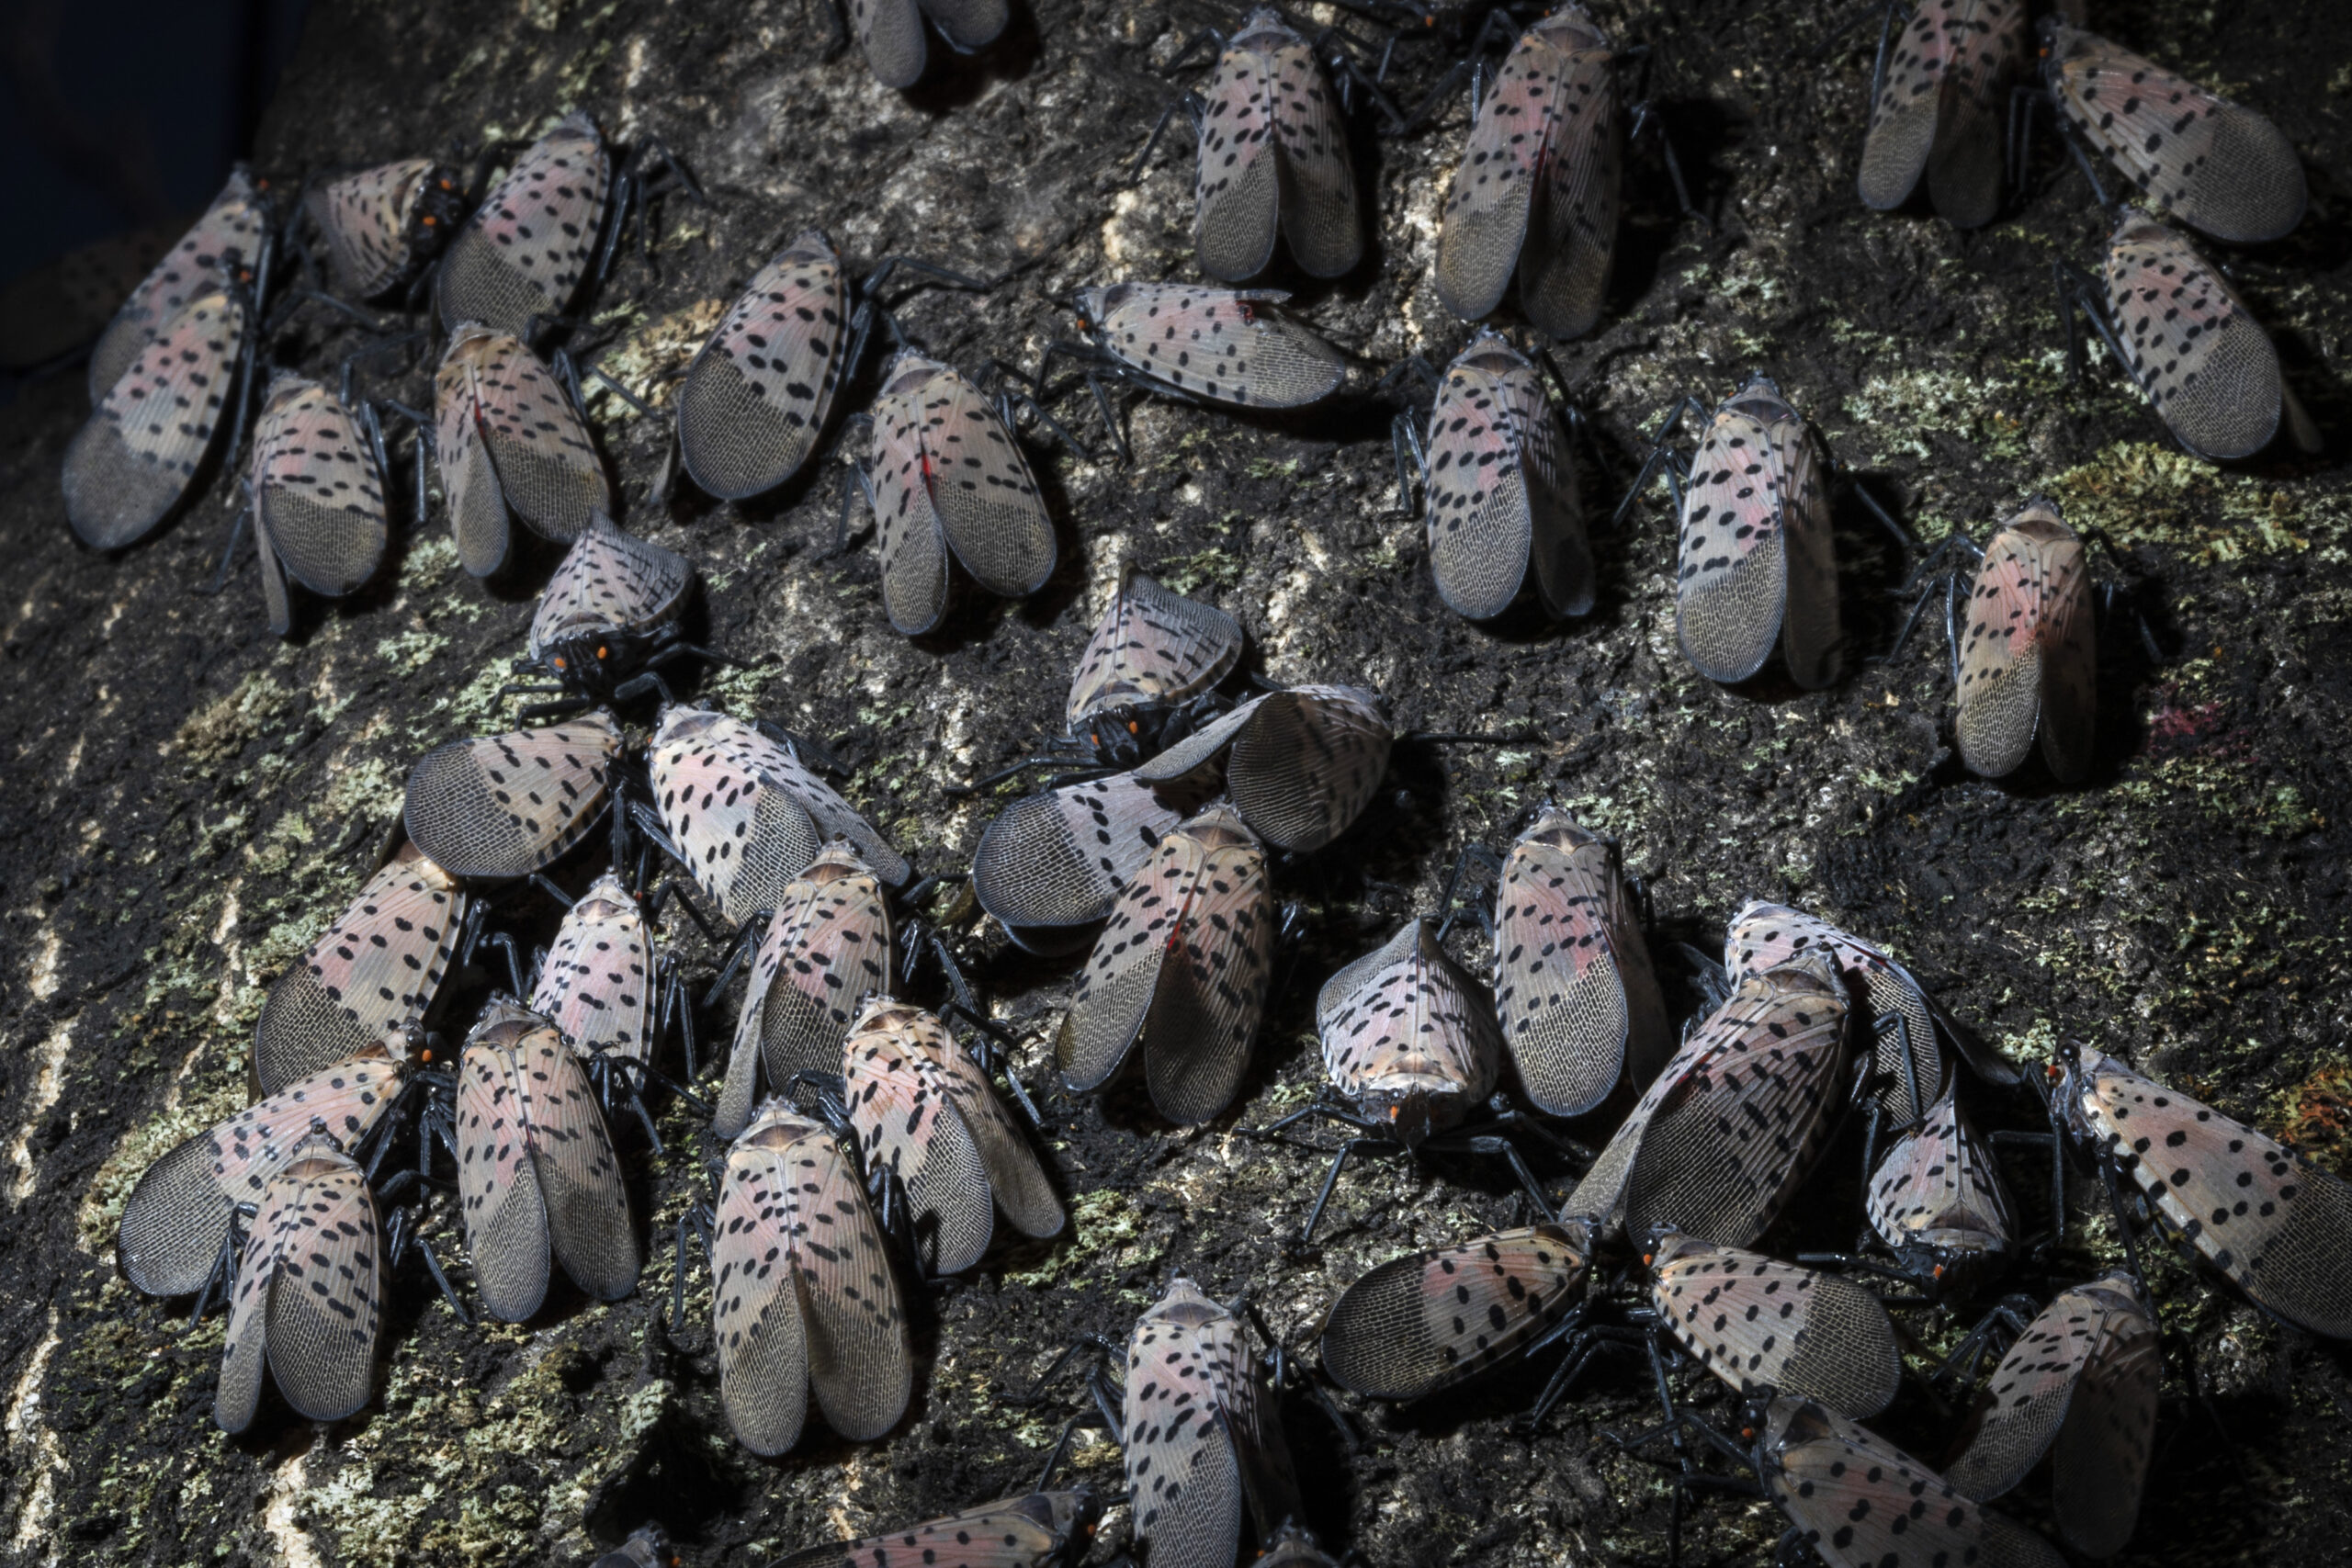 Several spotted lanternfly gather on a tree